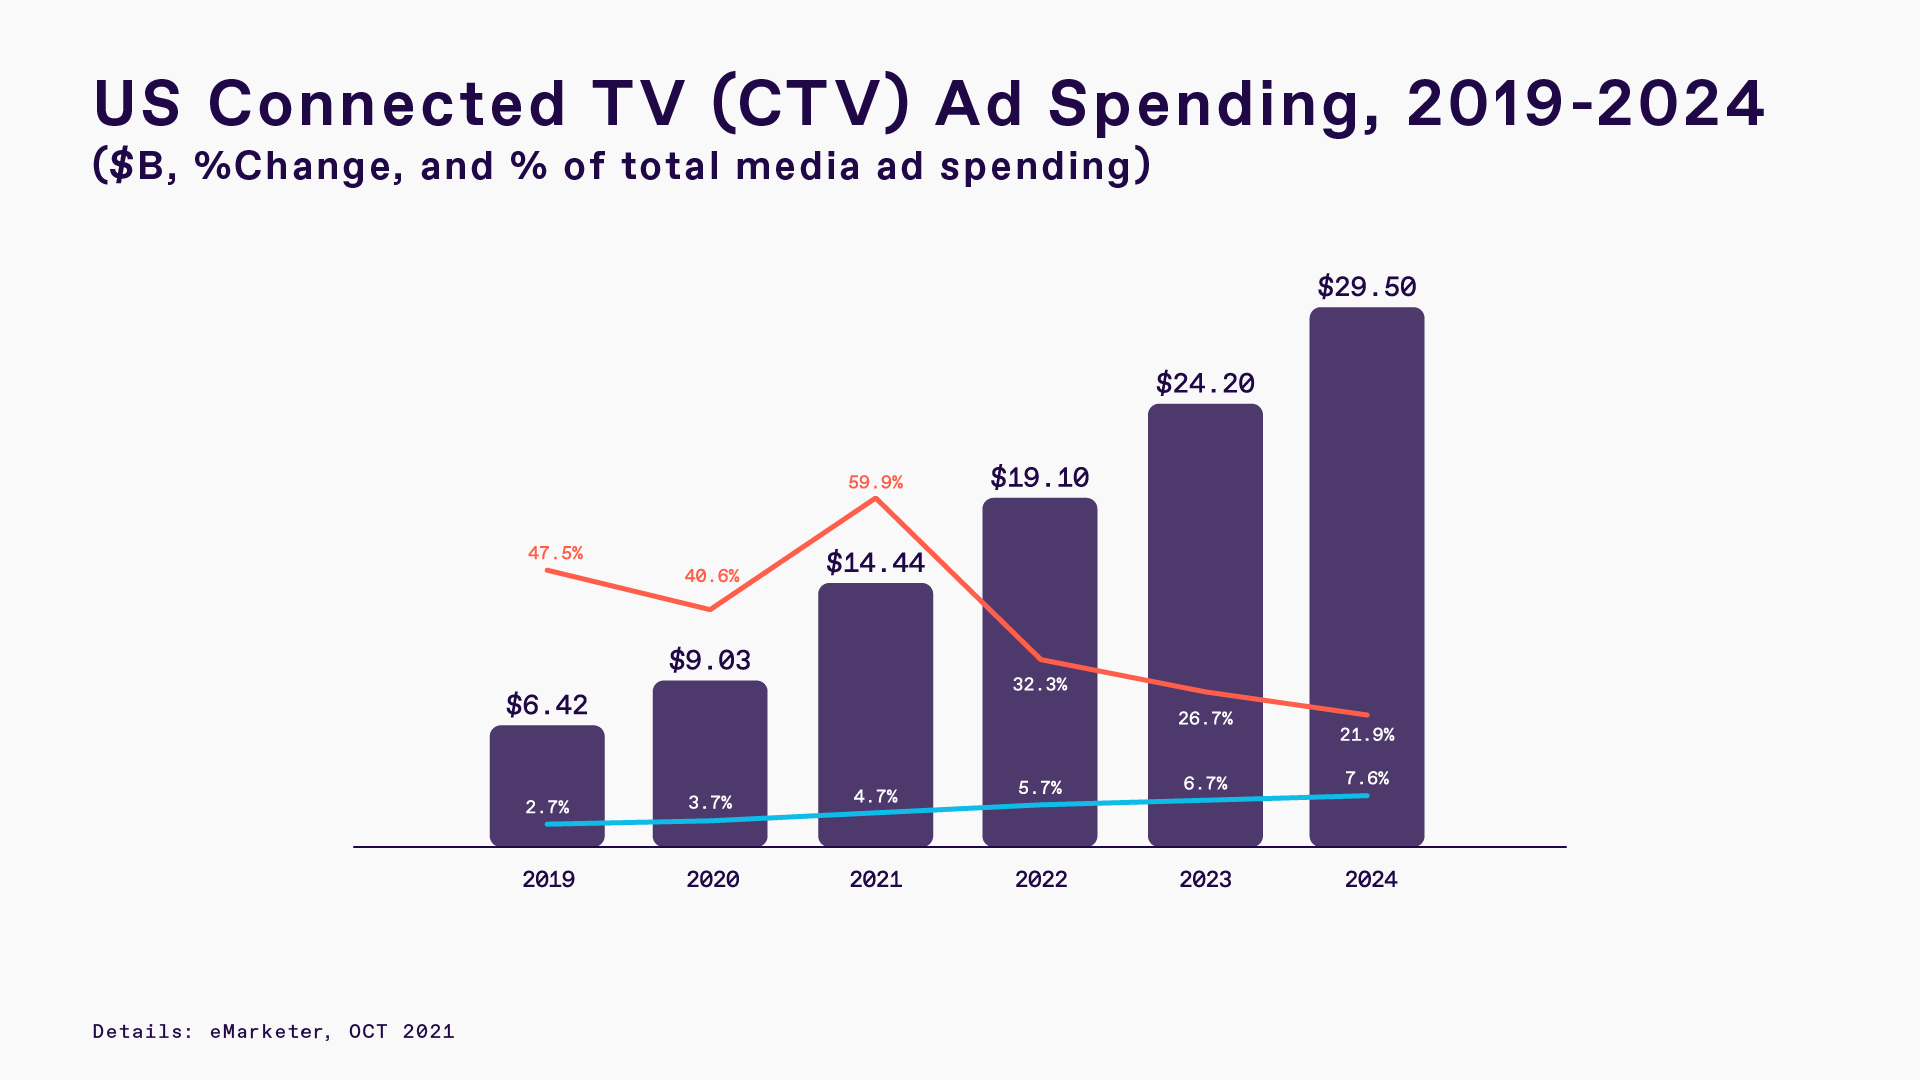 Chart showing US connected TV (CTV) ad spending from 2019 to 2024 